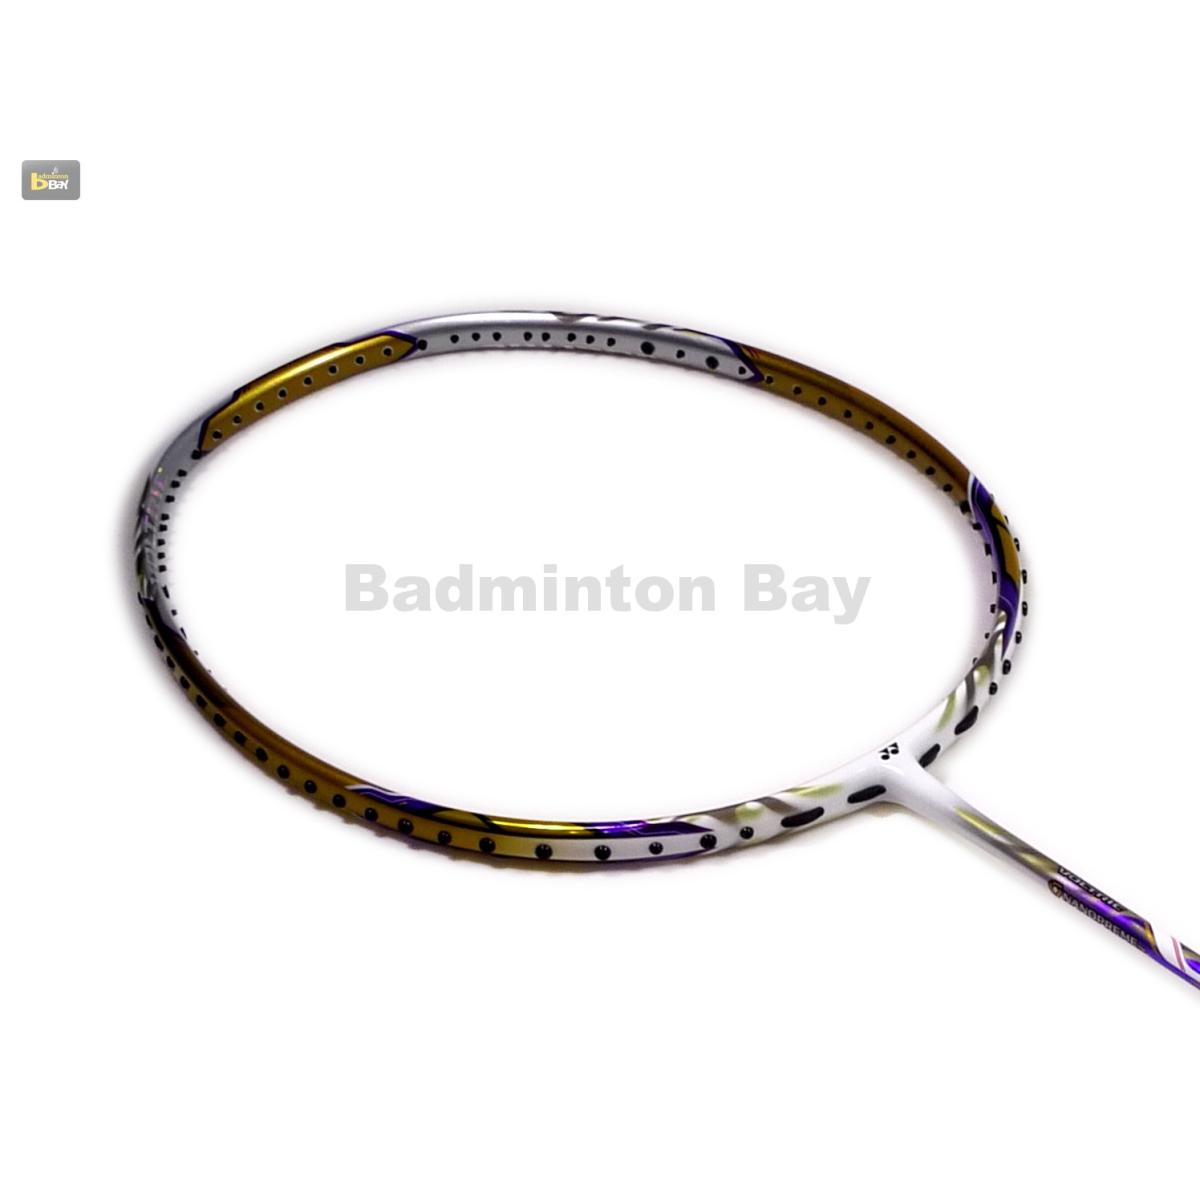 Out of stock Yonex Voltric Z-Force Limited Badminton Racket (4U)